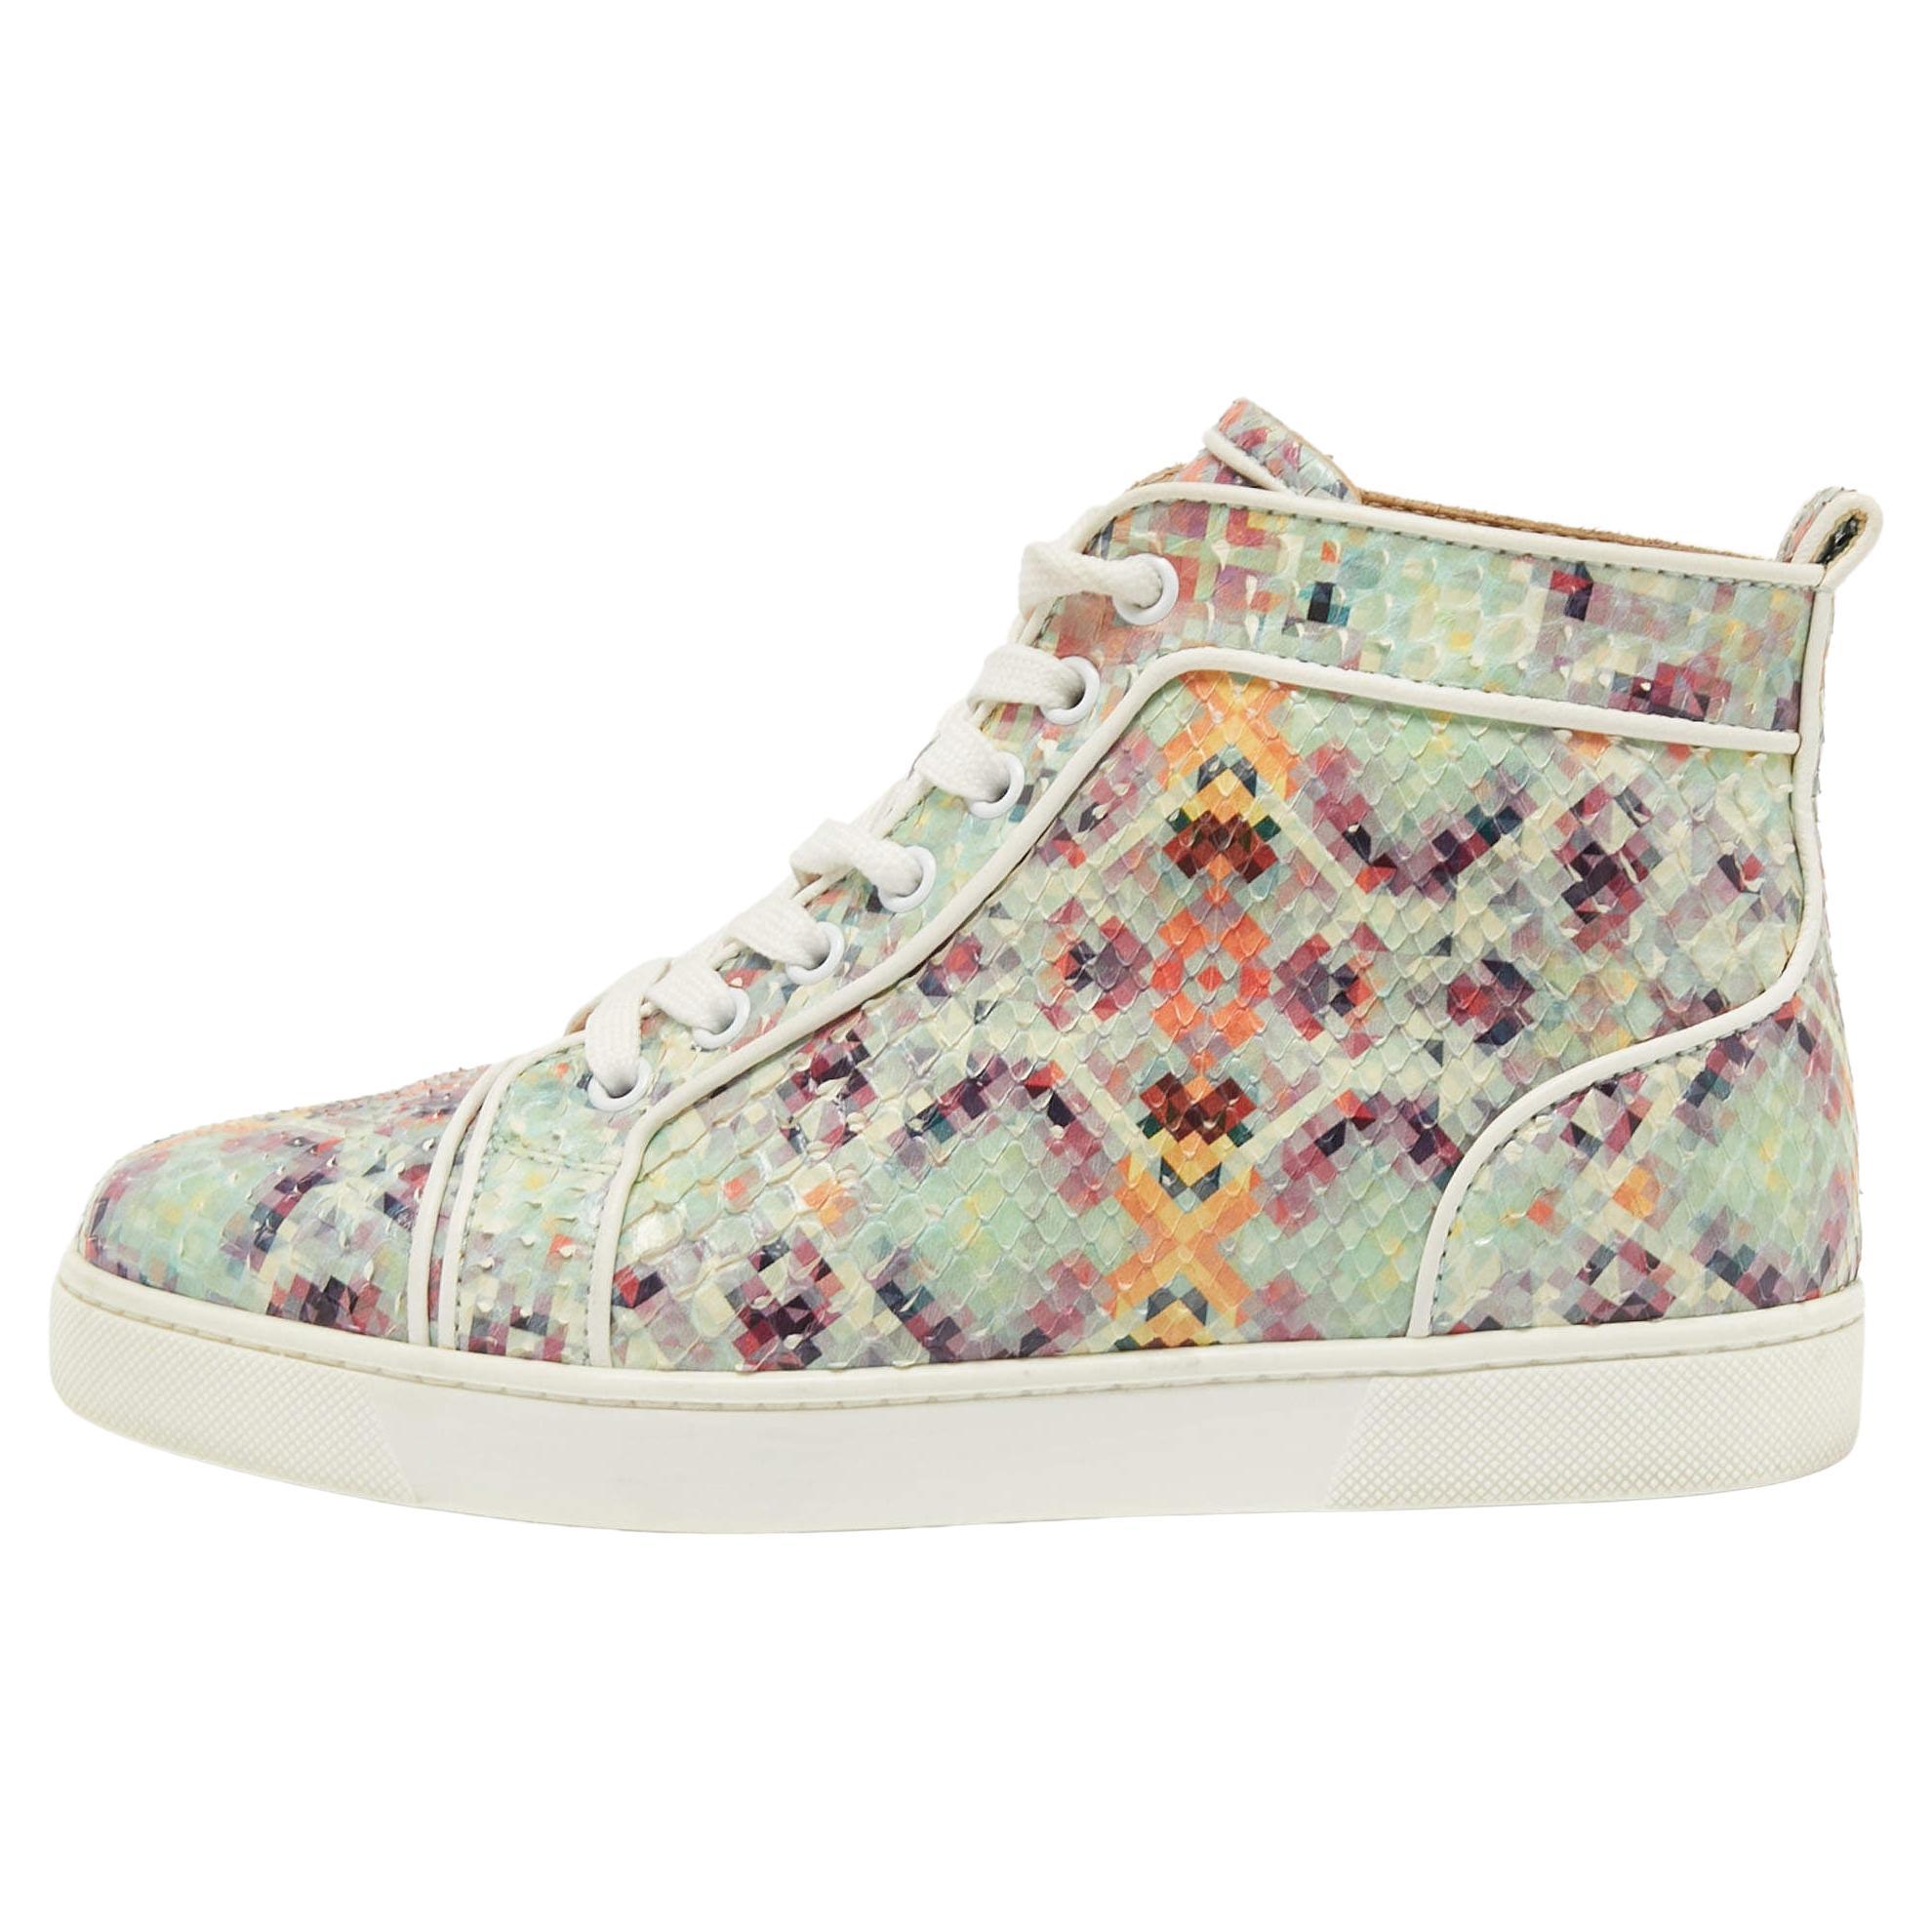 Christian Louboutin Printed Python Louis Orlato High Top Sneakers Size 37 For Sale